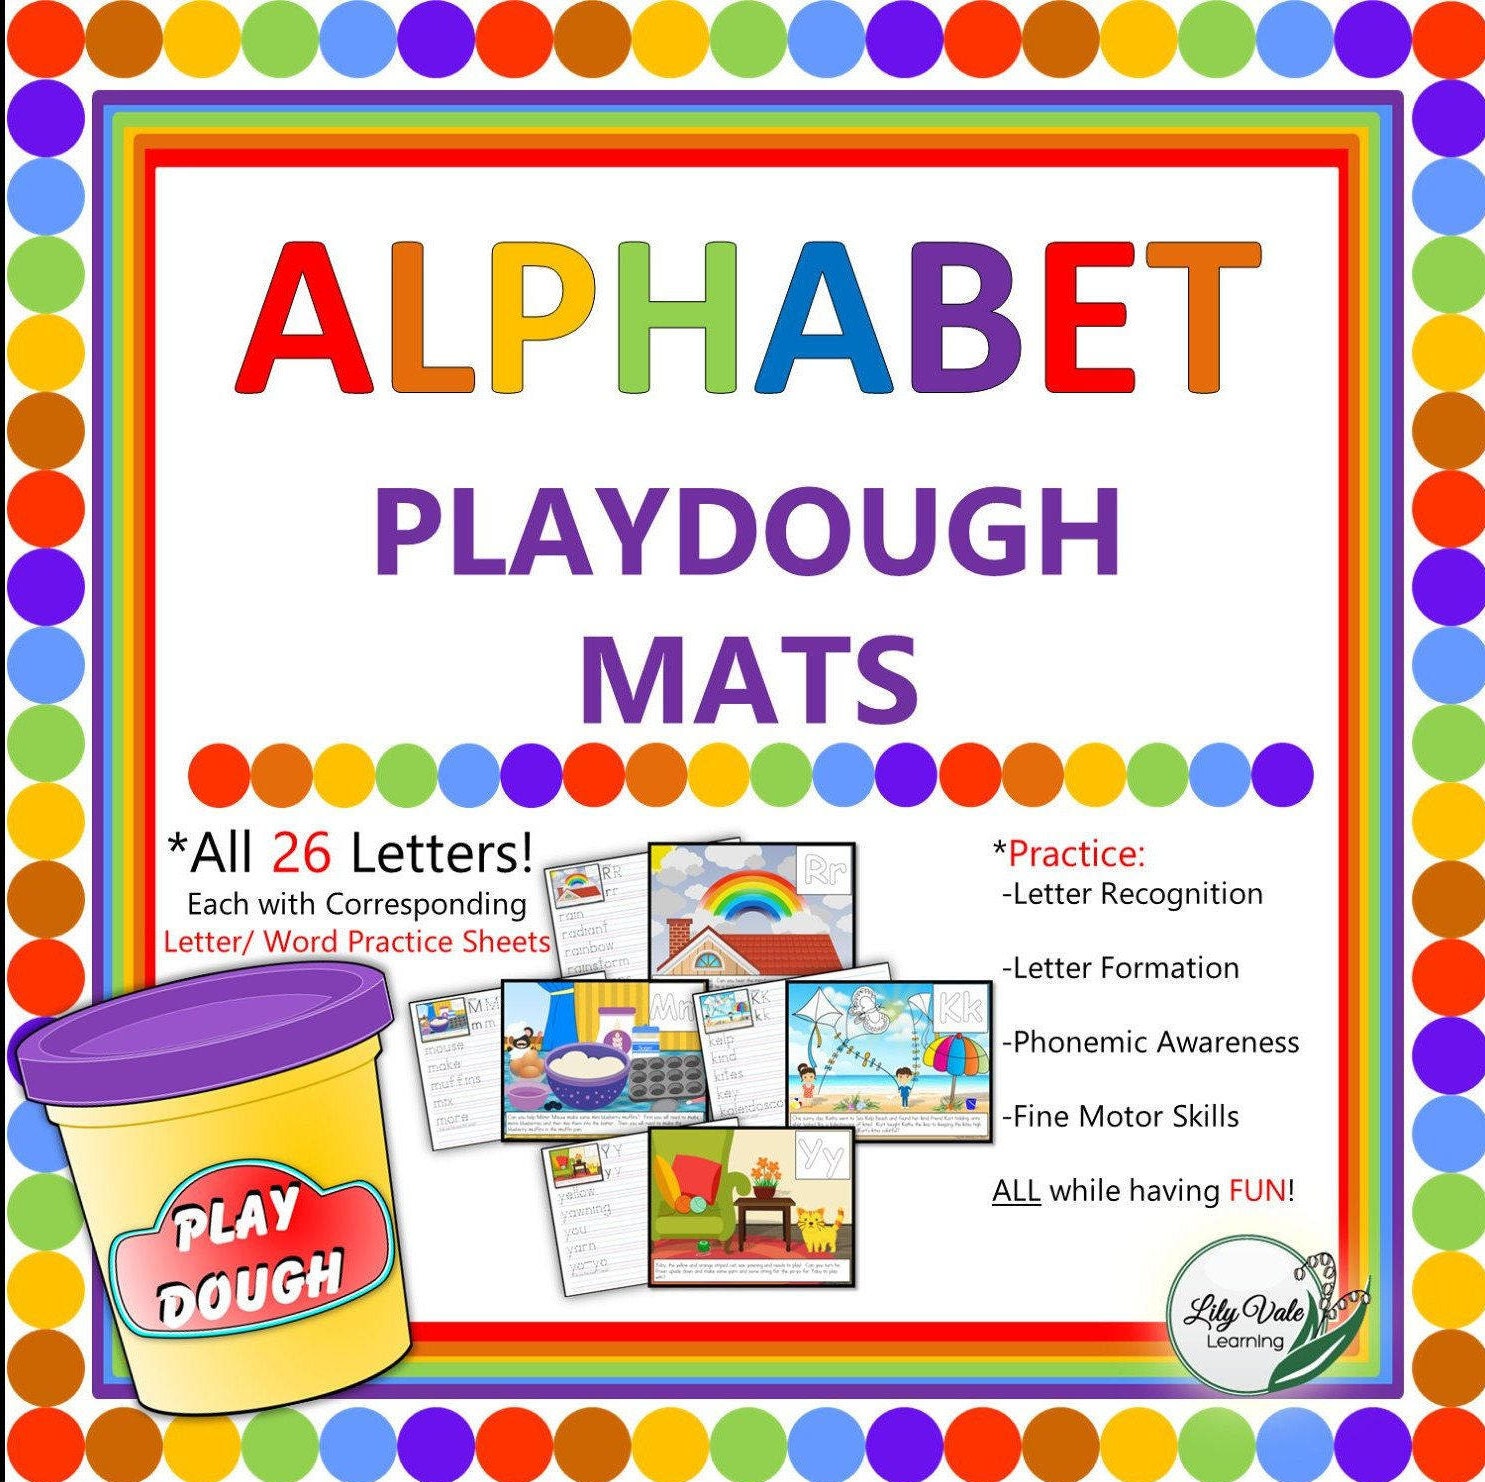 Printable Alphabet Play Dough Mats - From ABCs to ACTs